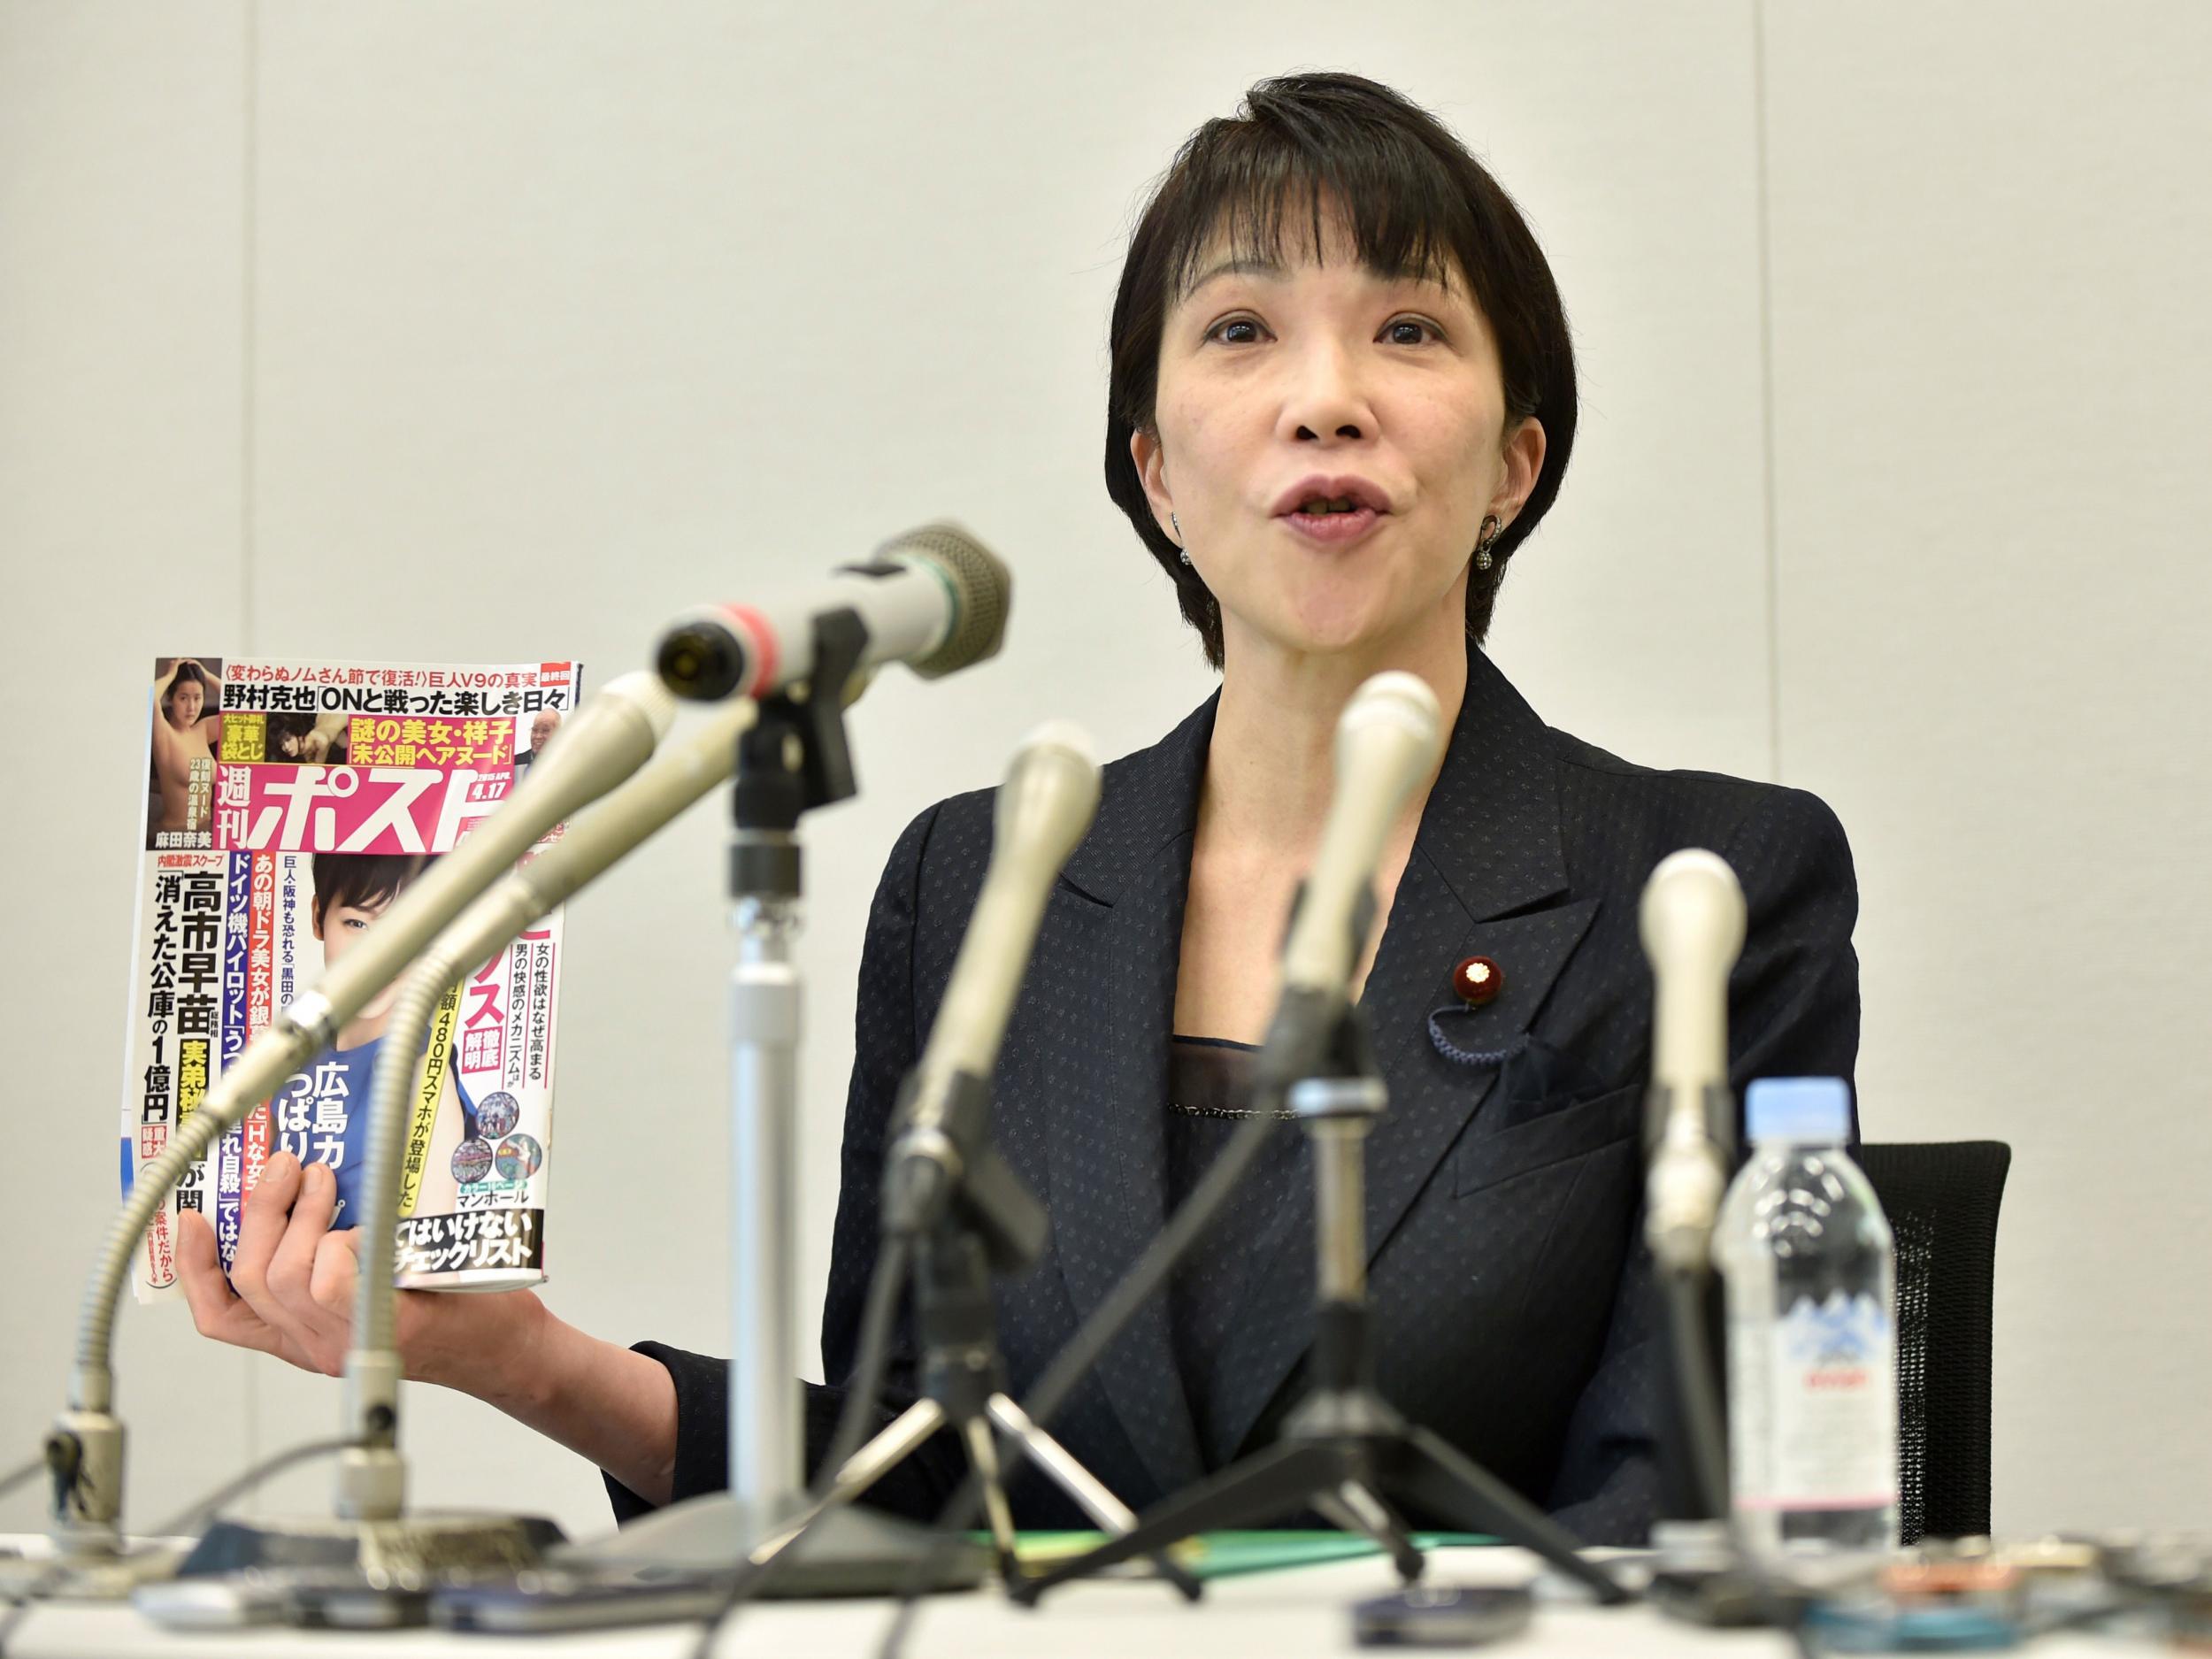 Japan's Internal Affairs and Communications Minister, Sanae Takaichi, who has said broadcasters could be forced to suspend operating if they continue to air programmes deemed politically biased.